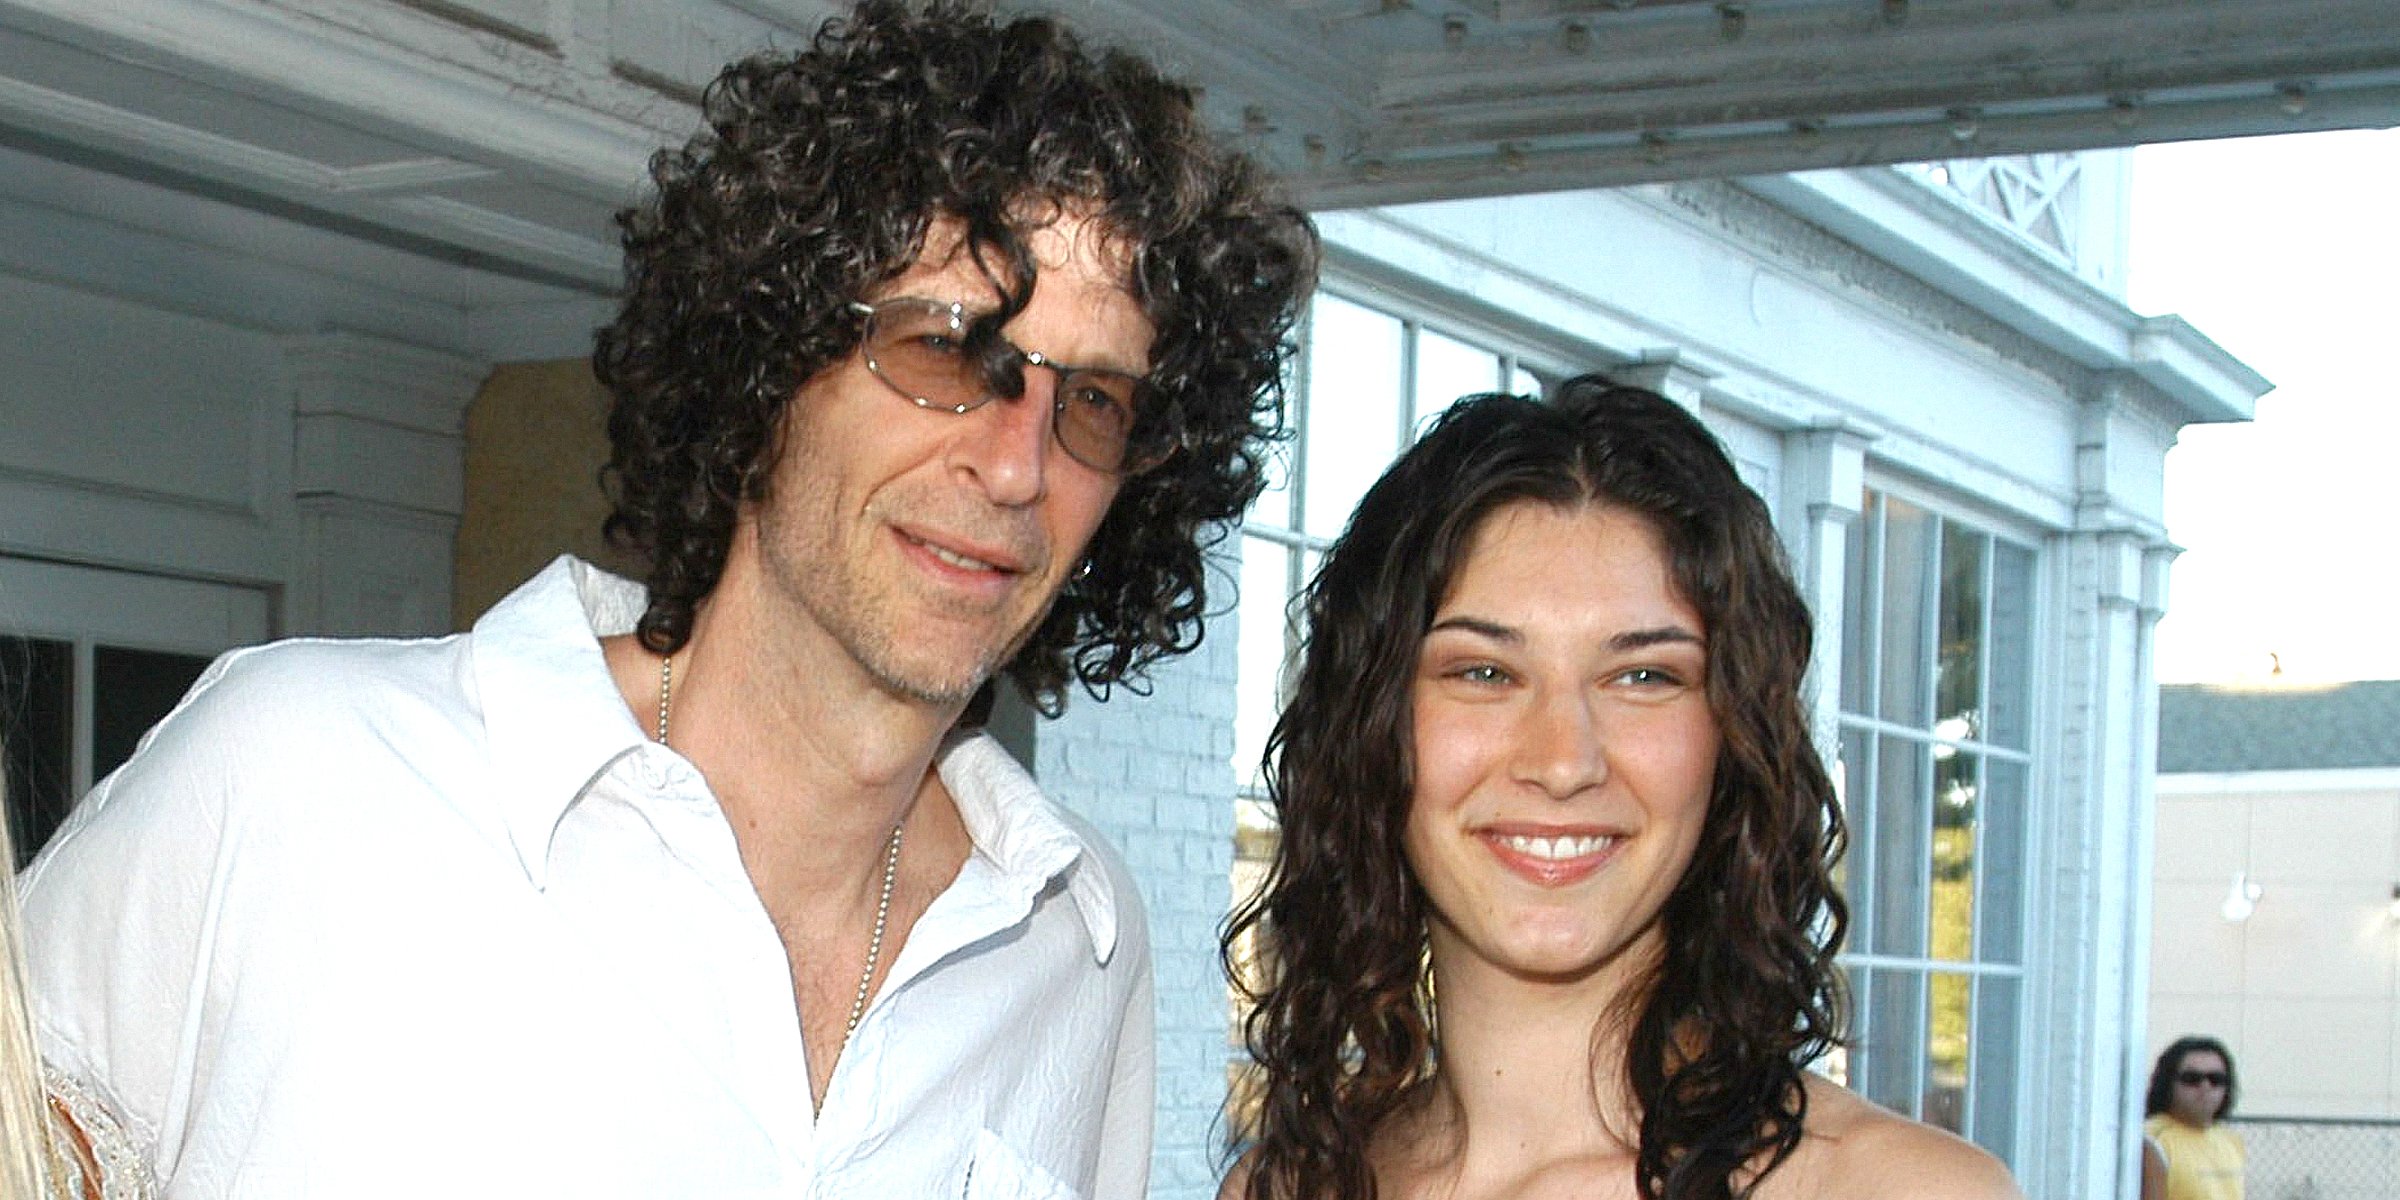 Emily Beth Stern Is a Student Rabbi & Lives Modestly as Howard Stern's